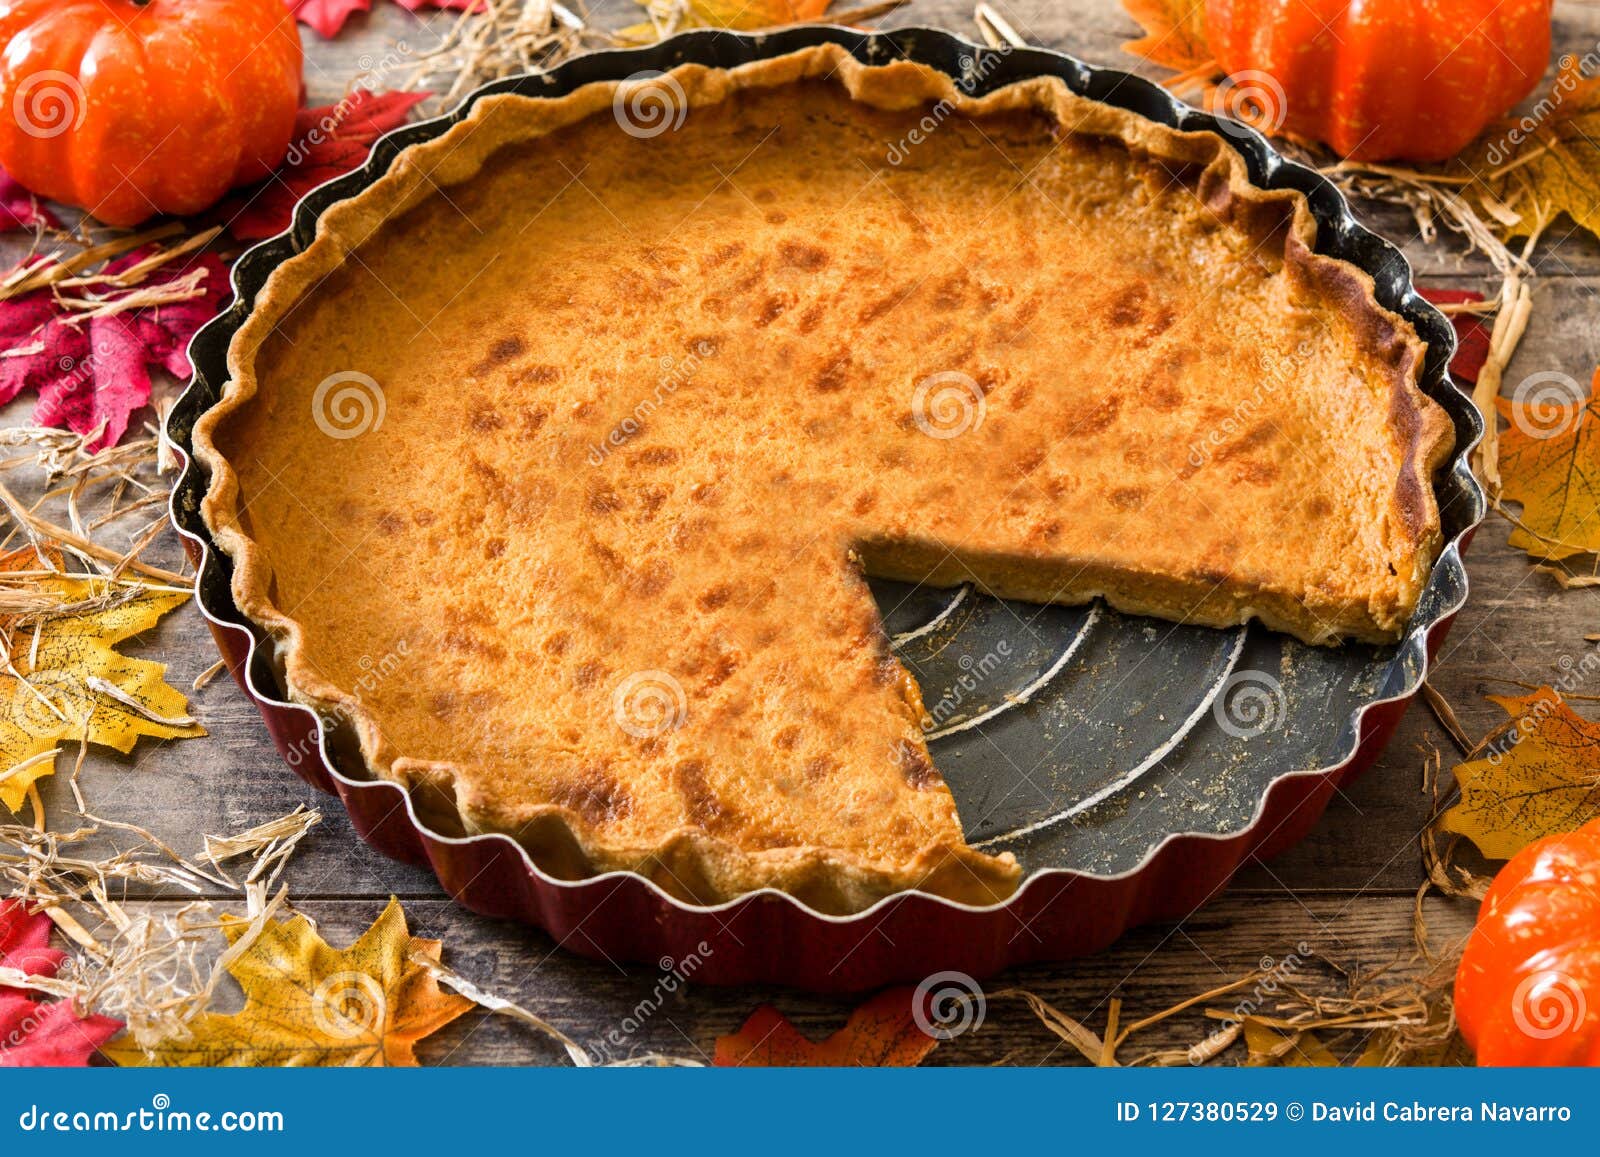 Traditional Pumpkin Pie For Thanksgiving On Wood Stock ...